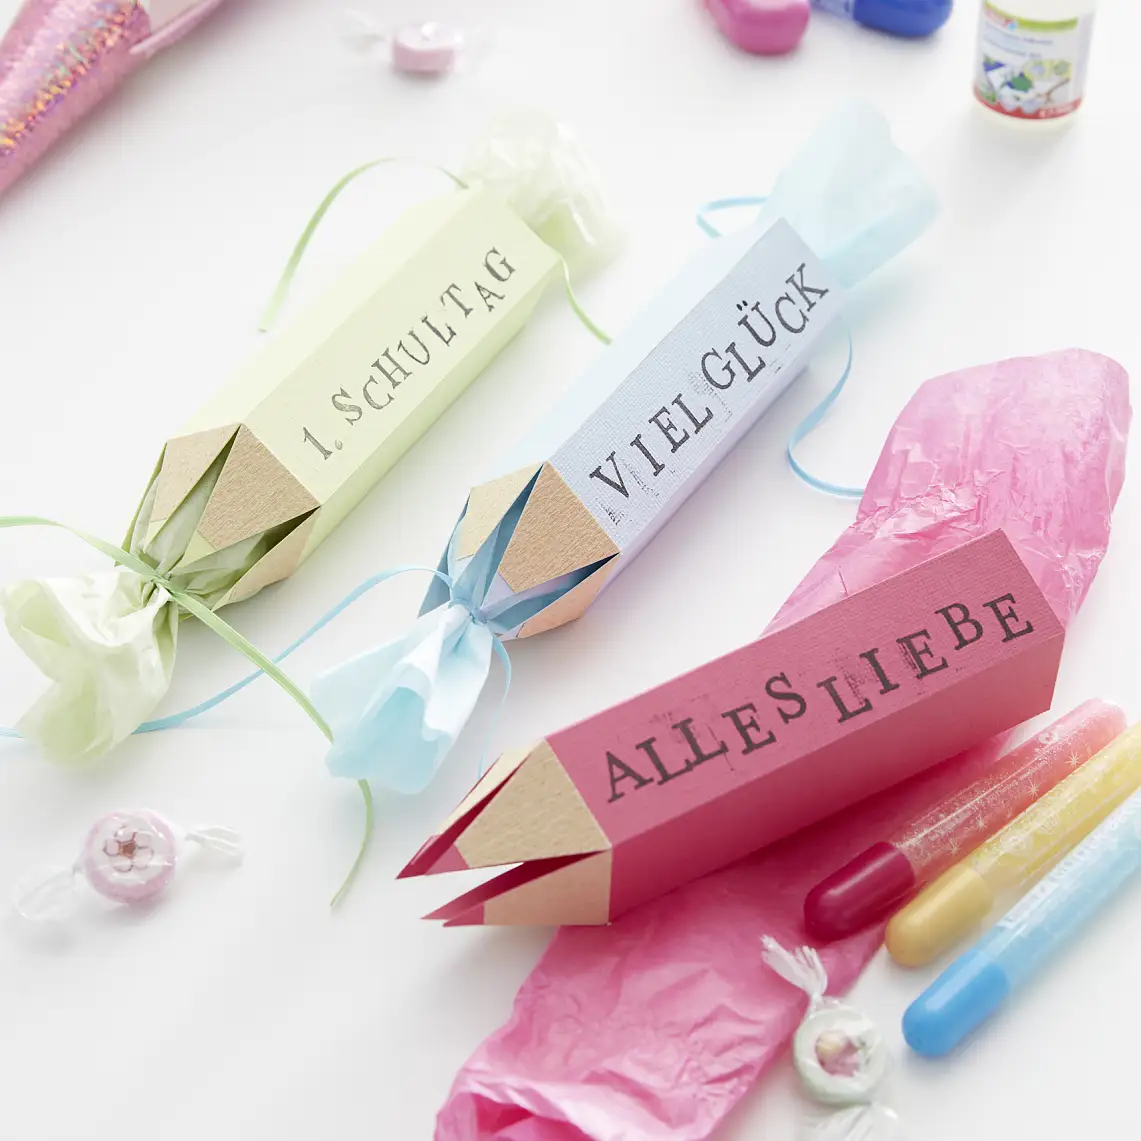 Magic pencil: Abracadabra – The best gifts for the first day of school are hiding in a self-crafted pencil! It is decorated with plenty of good wishes and filled with goodies.